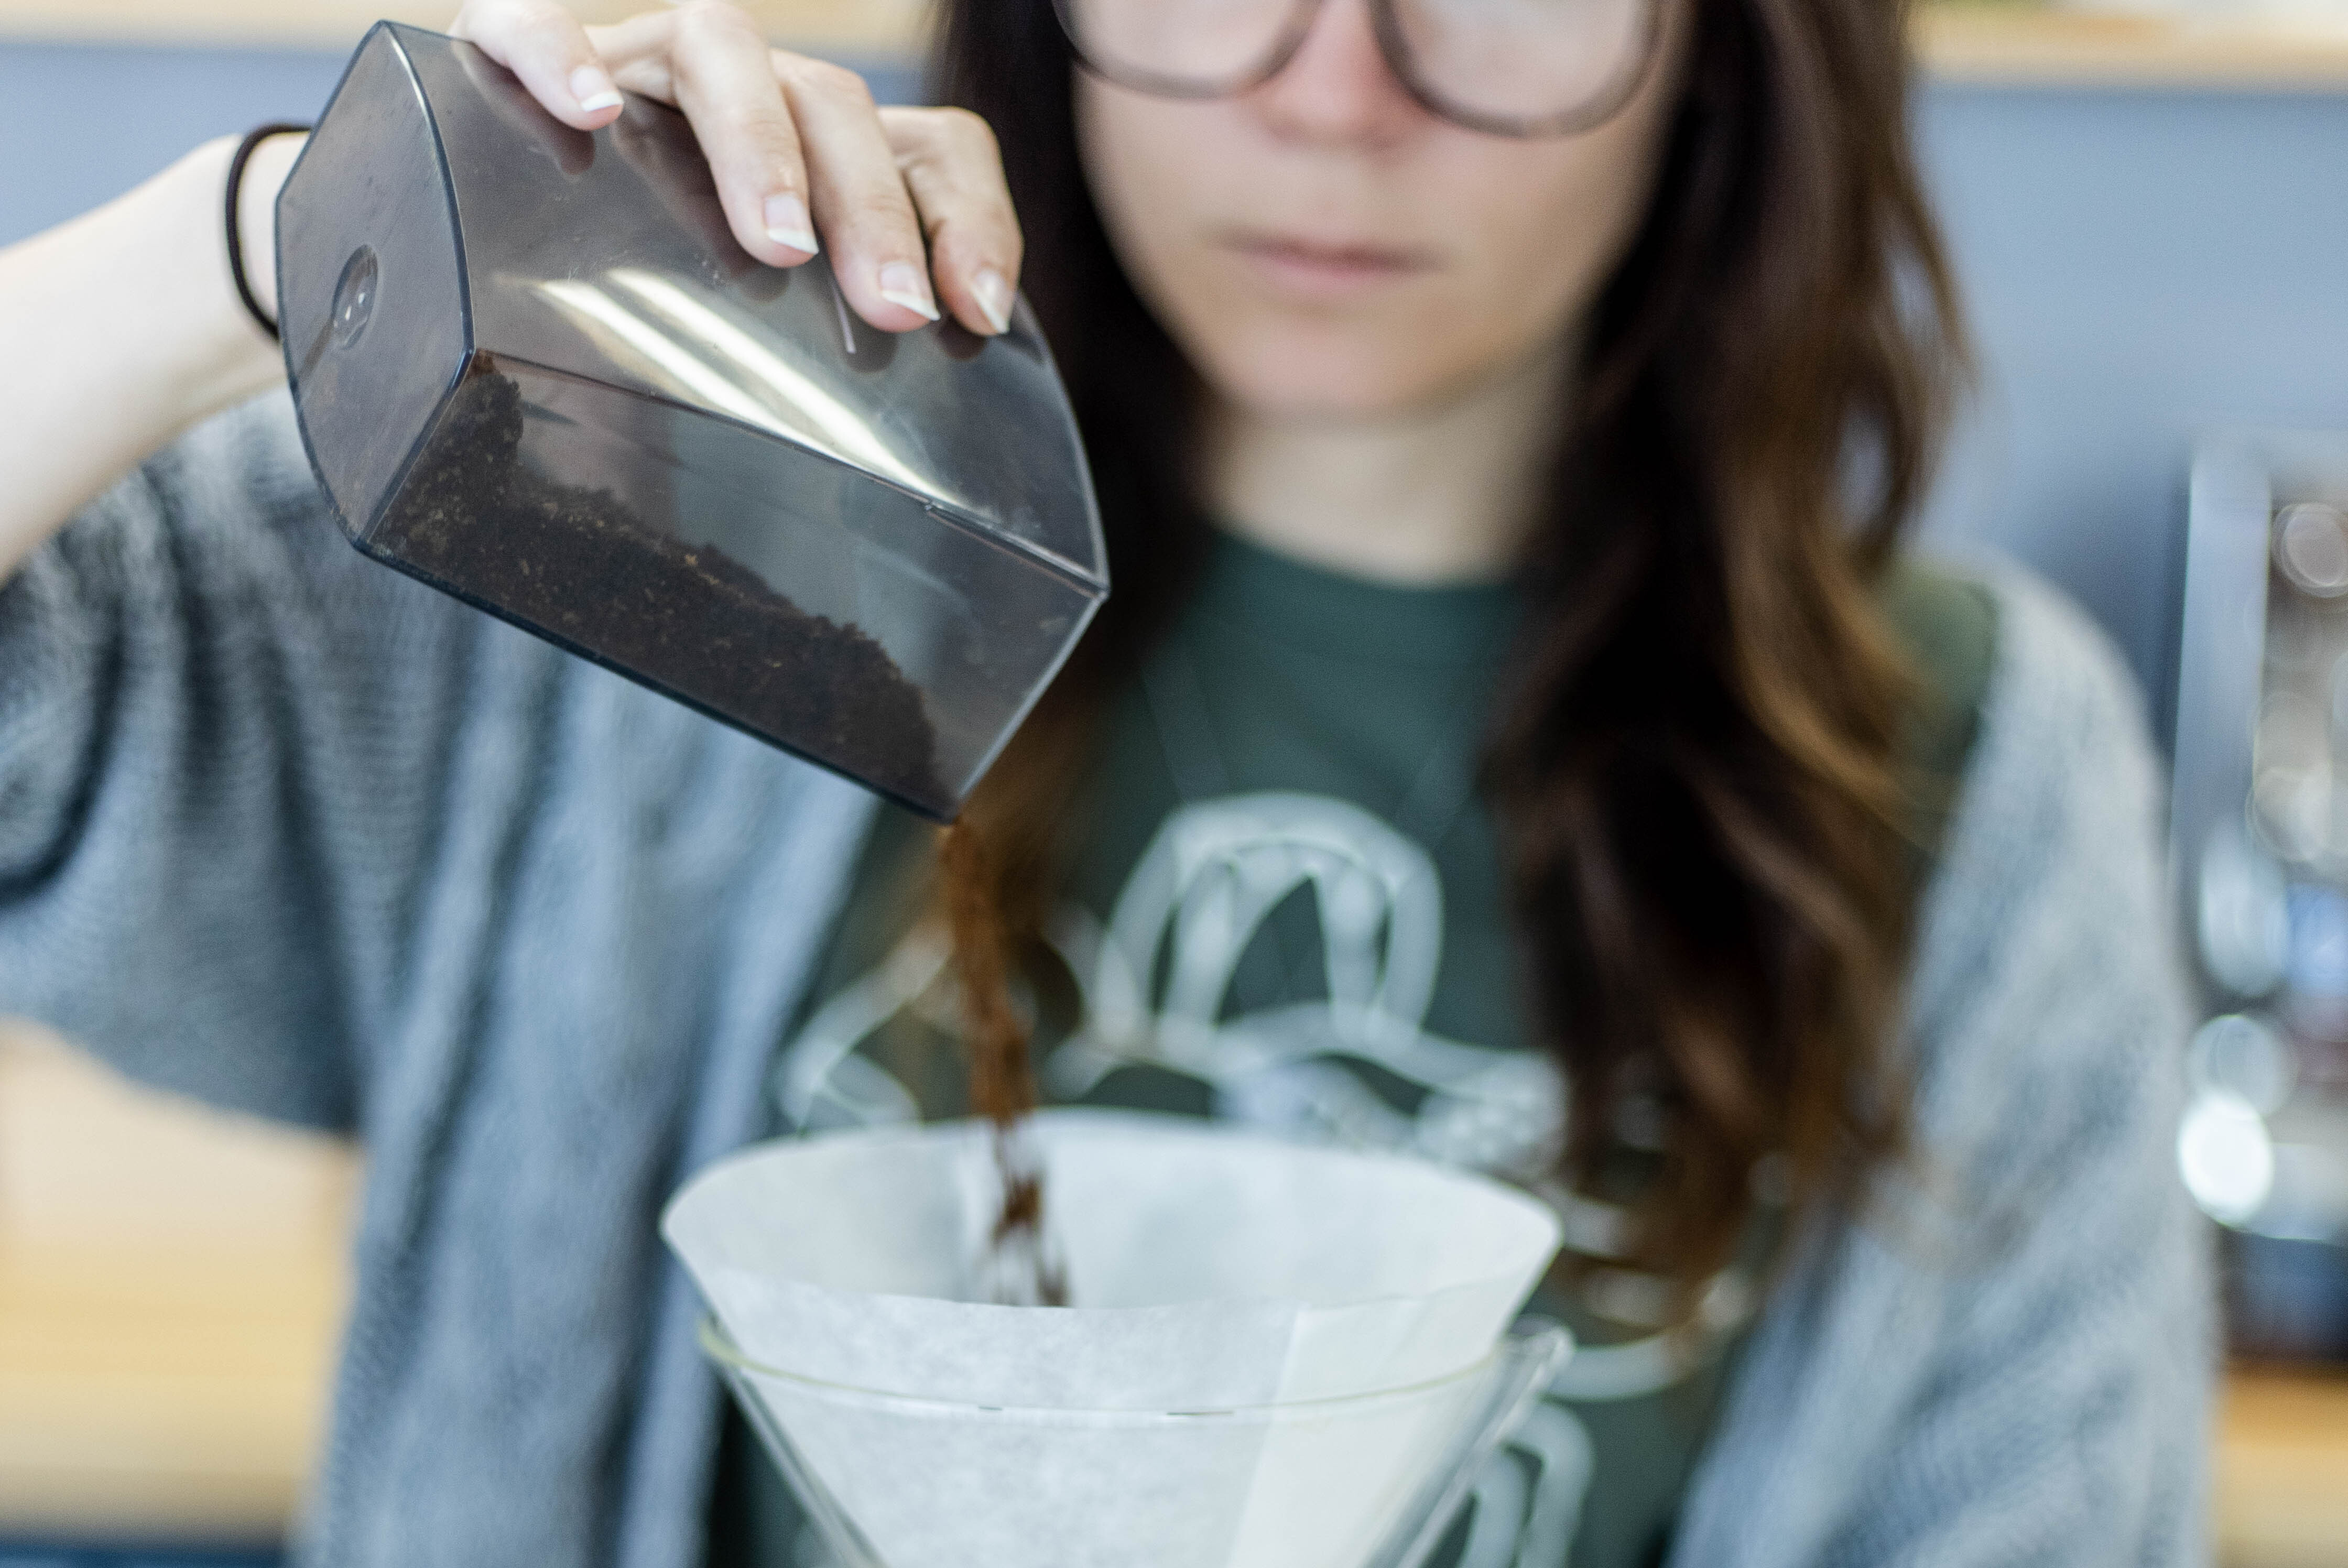 Understanding Coffee Brewing with Your Chemex - Prima Coffee Equipment